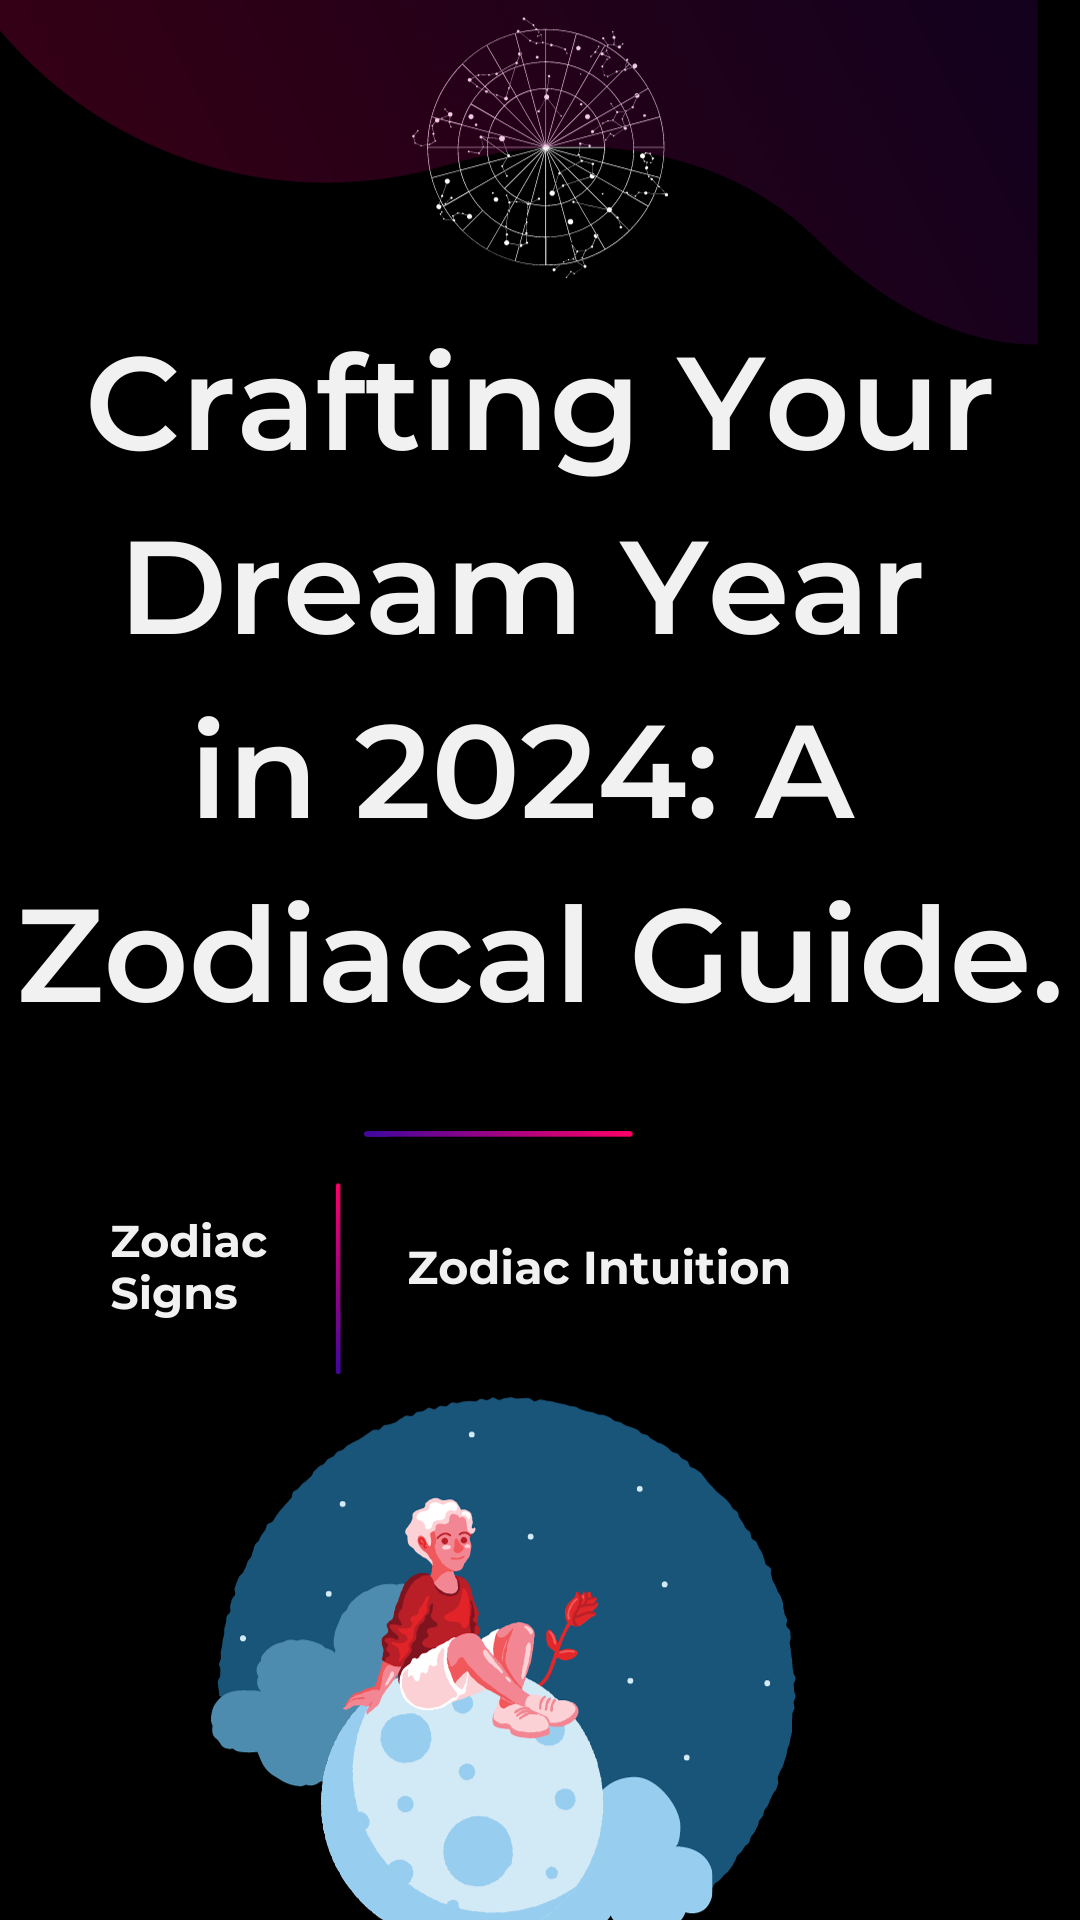 Crafting Your Dream Year in 2024: A Zodiacal Guide.